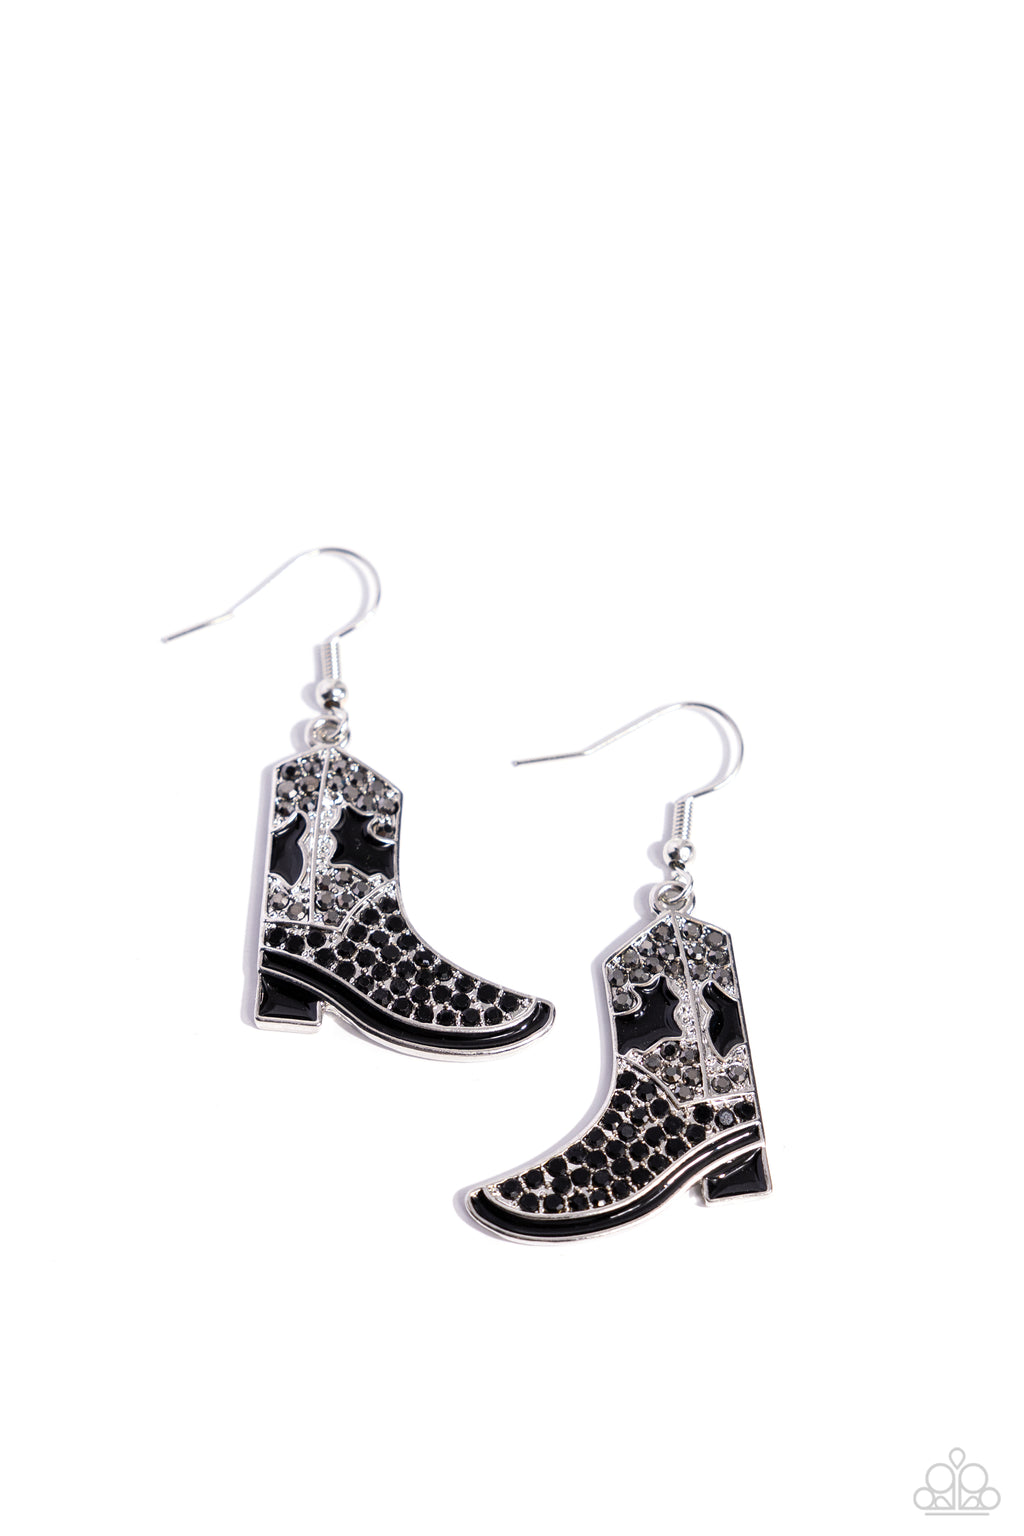 five-dollar-jewelry-boot-scootin-bling-black-earrings-paparazzi-accessories